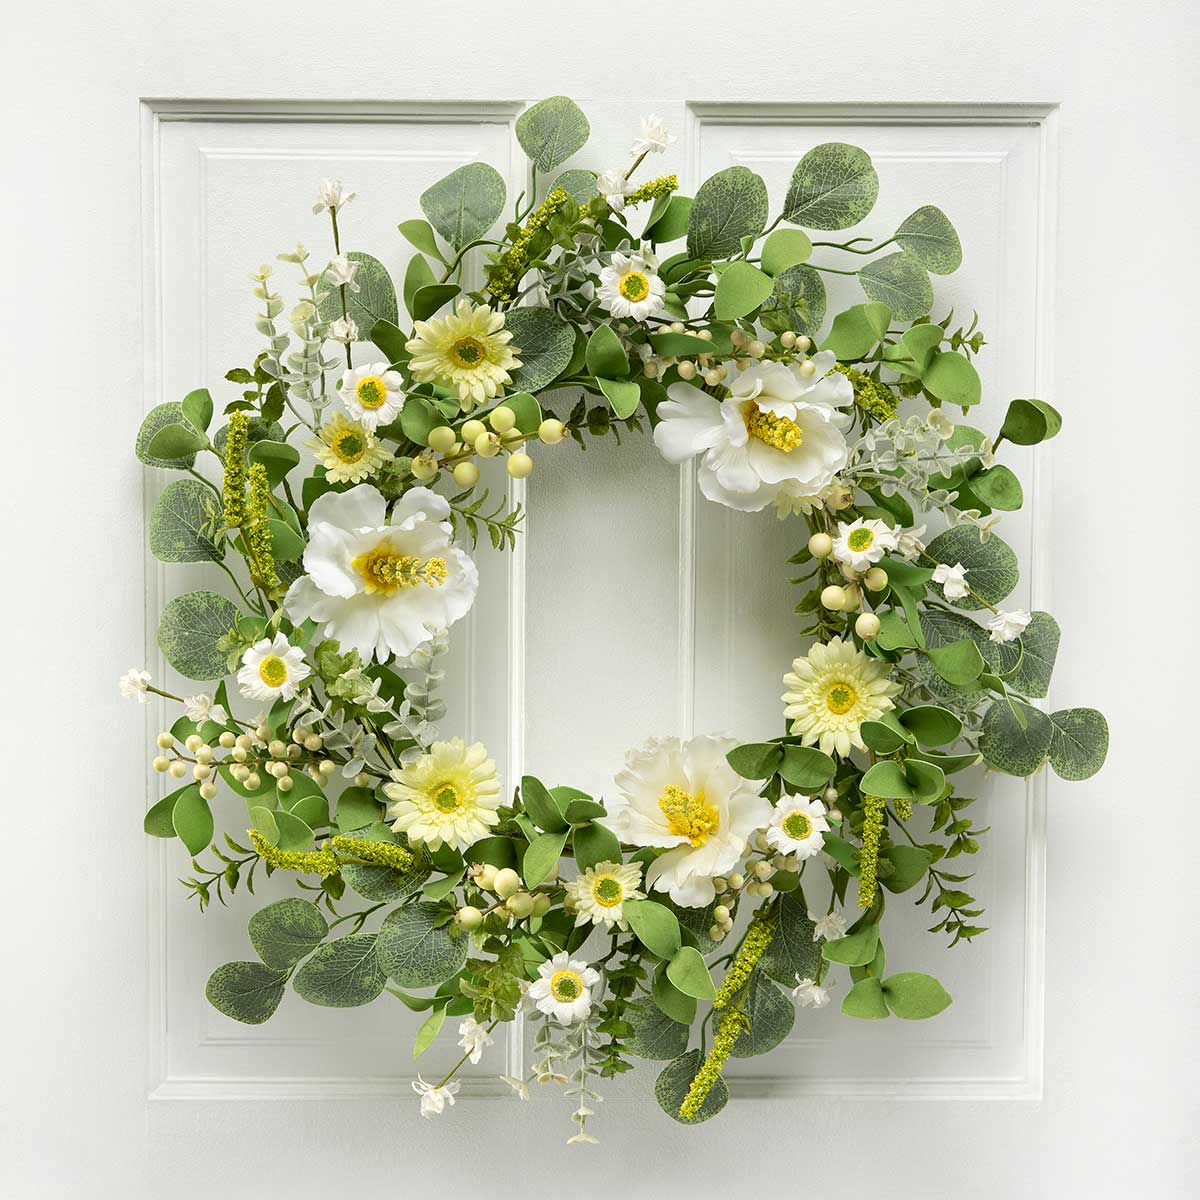 WREATH HIBISCUS/DAISY 22IN (INNER RING 11IN) POLYESTER/PAPER - Click Image to Close